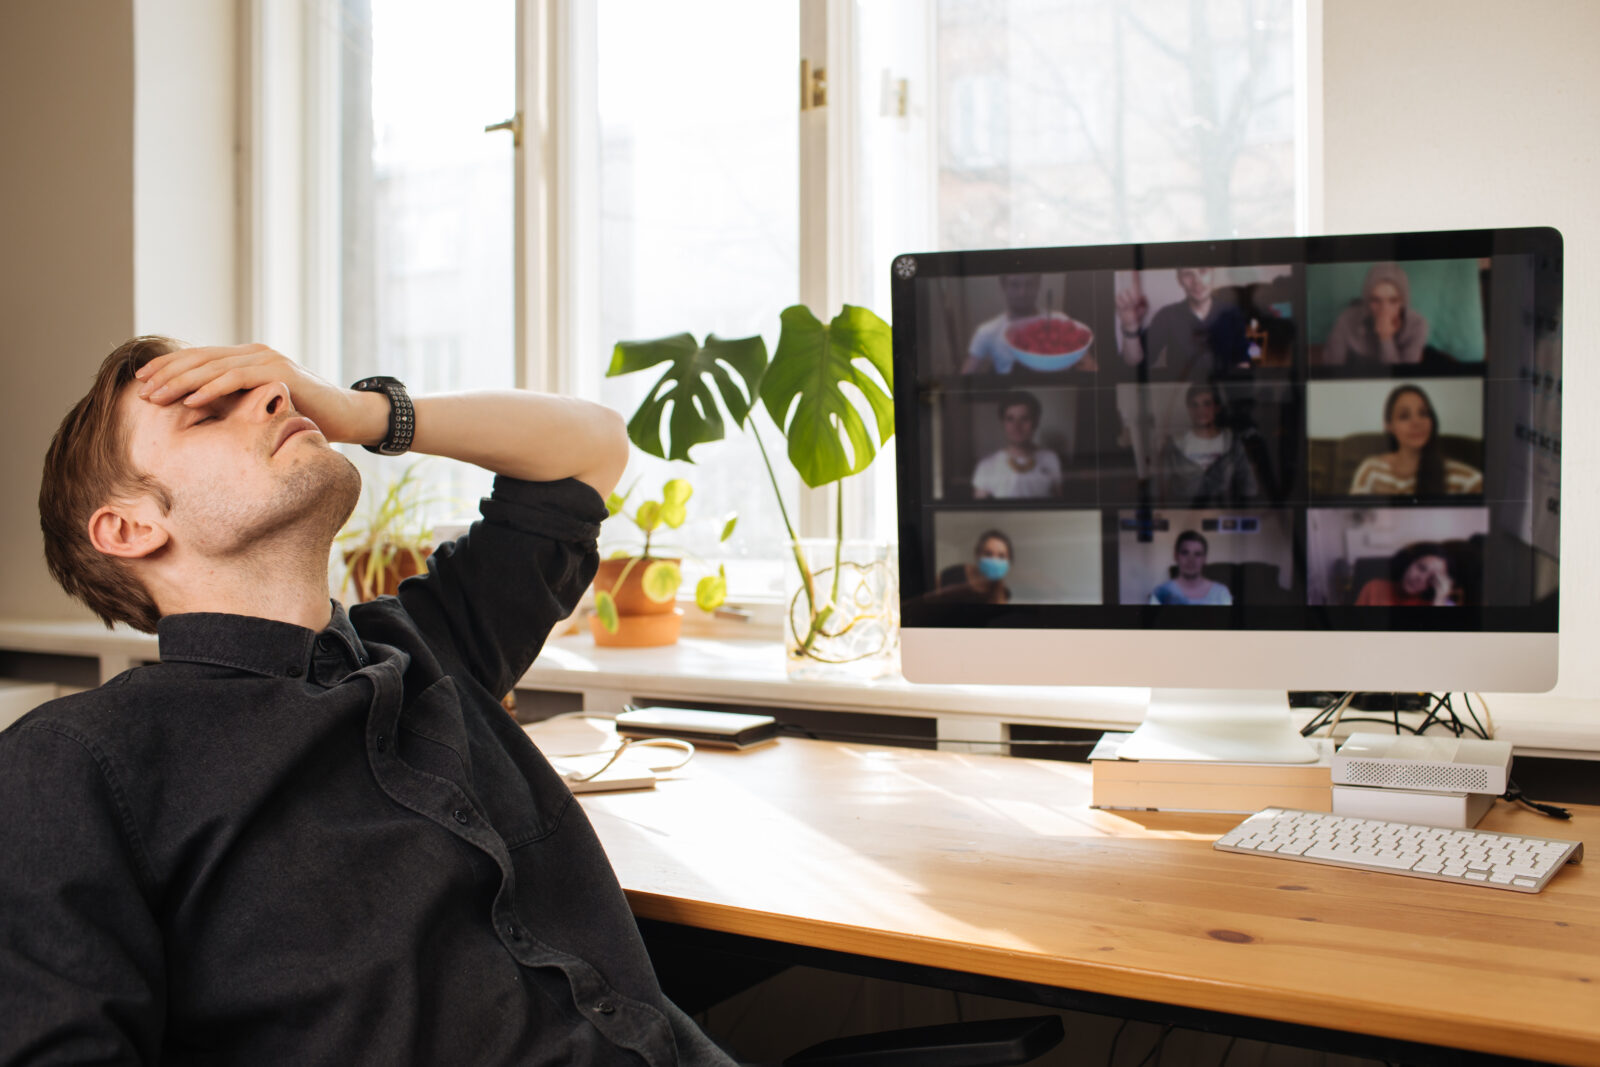 Man Fatigue during home video conference meeting call. Post-work exhaustion from constant face-to-face digital interactions. Working remotely Stay connected during pandemic to combat loneliness